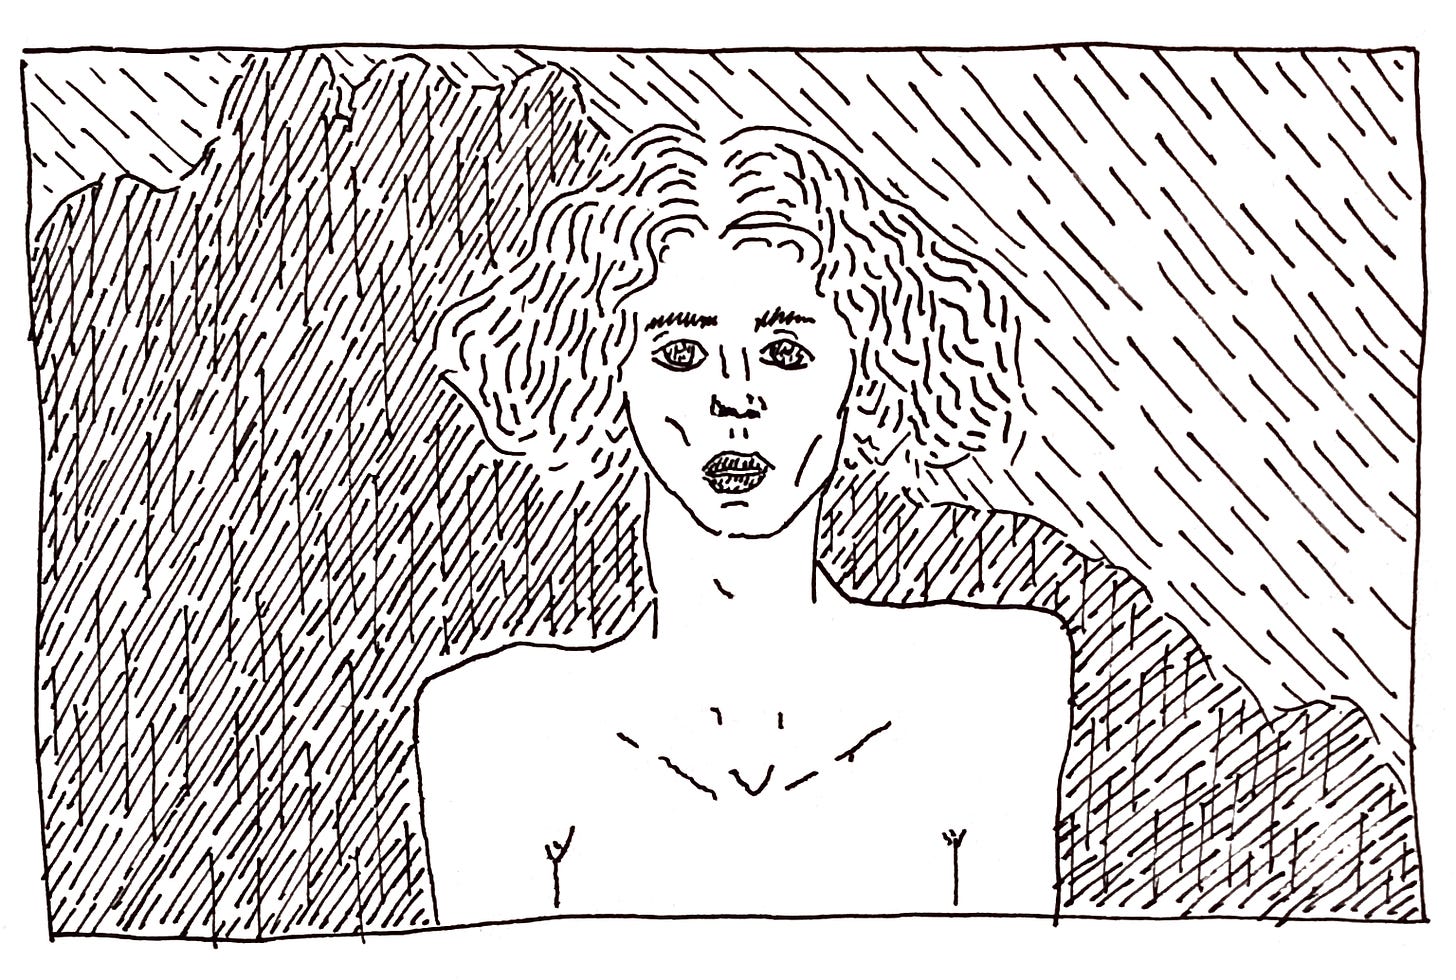 a black and white line drawing of the image of SOPHIE above, drawn by Leah. the sky and SOPHIE's hair are rendered into a torrent of lines and squiggles